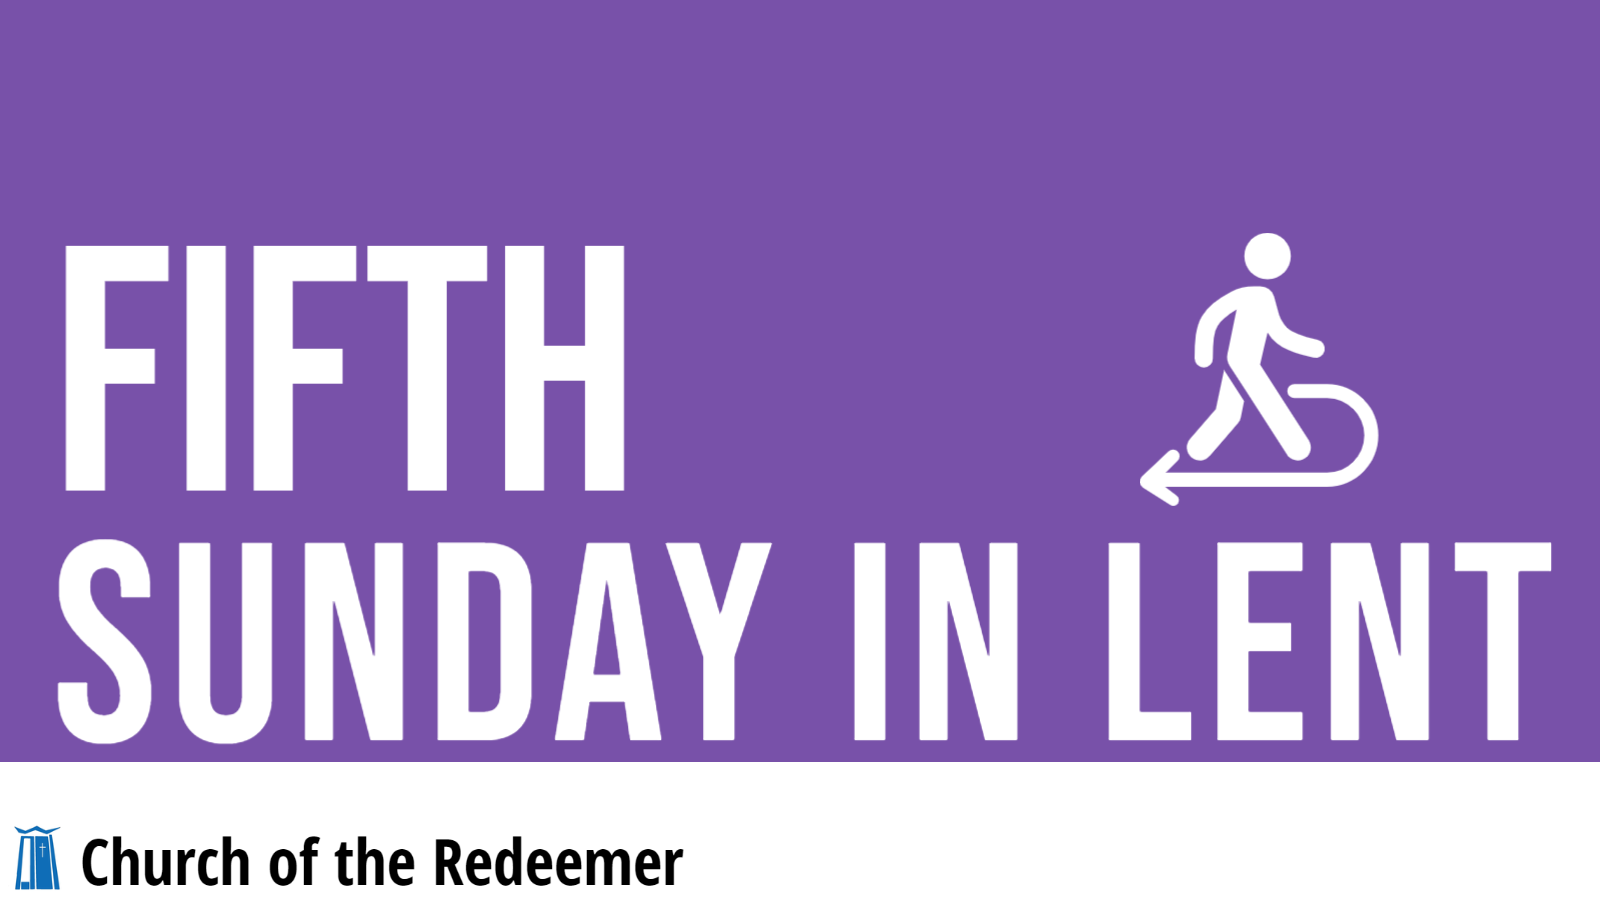 The 5th Sunday in Lent